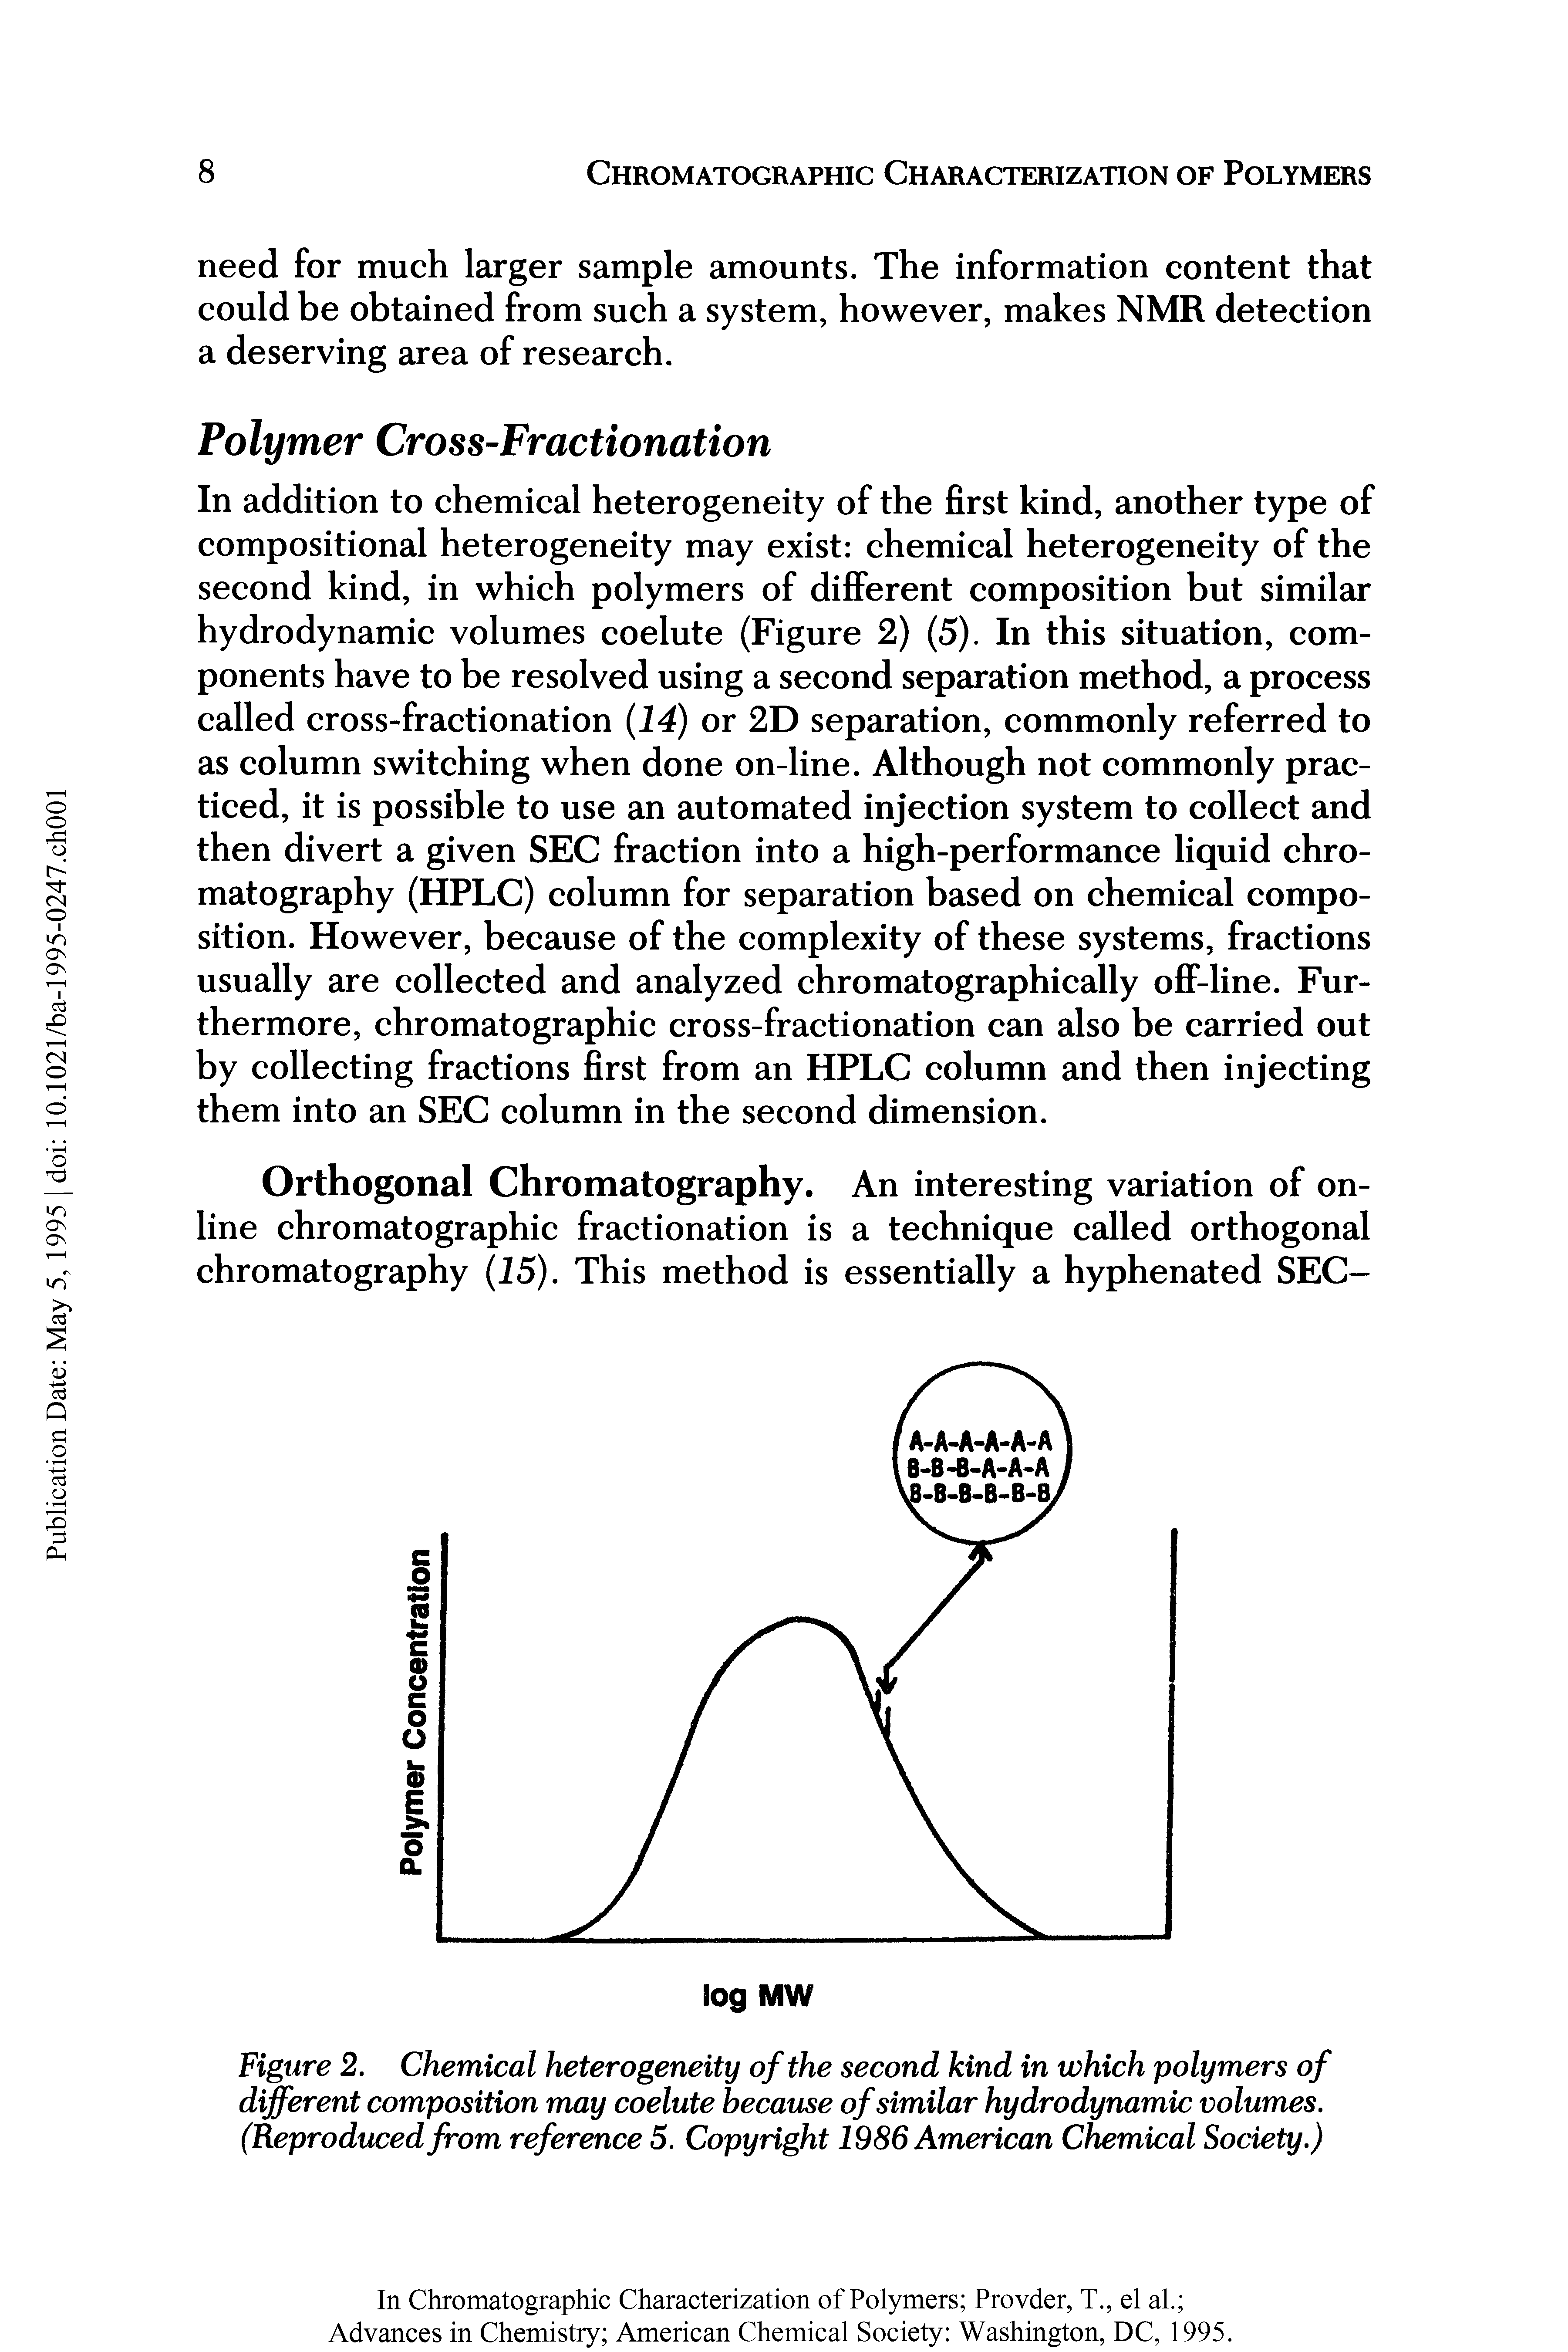 Figure 2. Chemical heterogeneity of the second kind in which polymers of different composition may coelute because of similar hydrodynamic volumes. (Reproduced from reference 5. Copyright 1986 American Chemical Society.)...